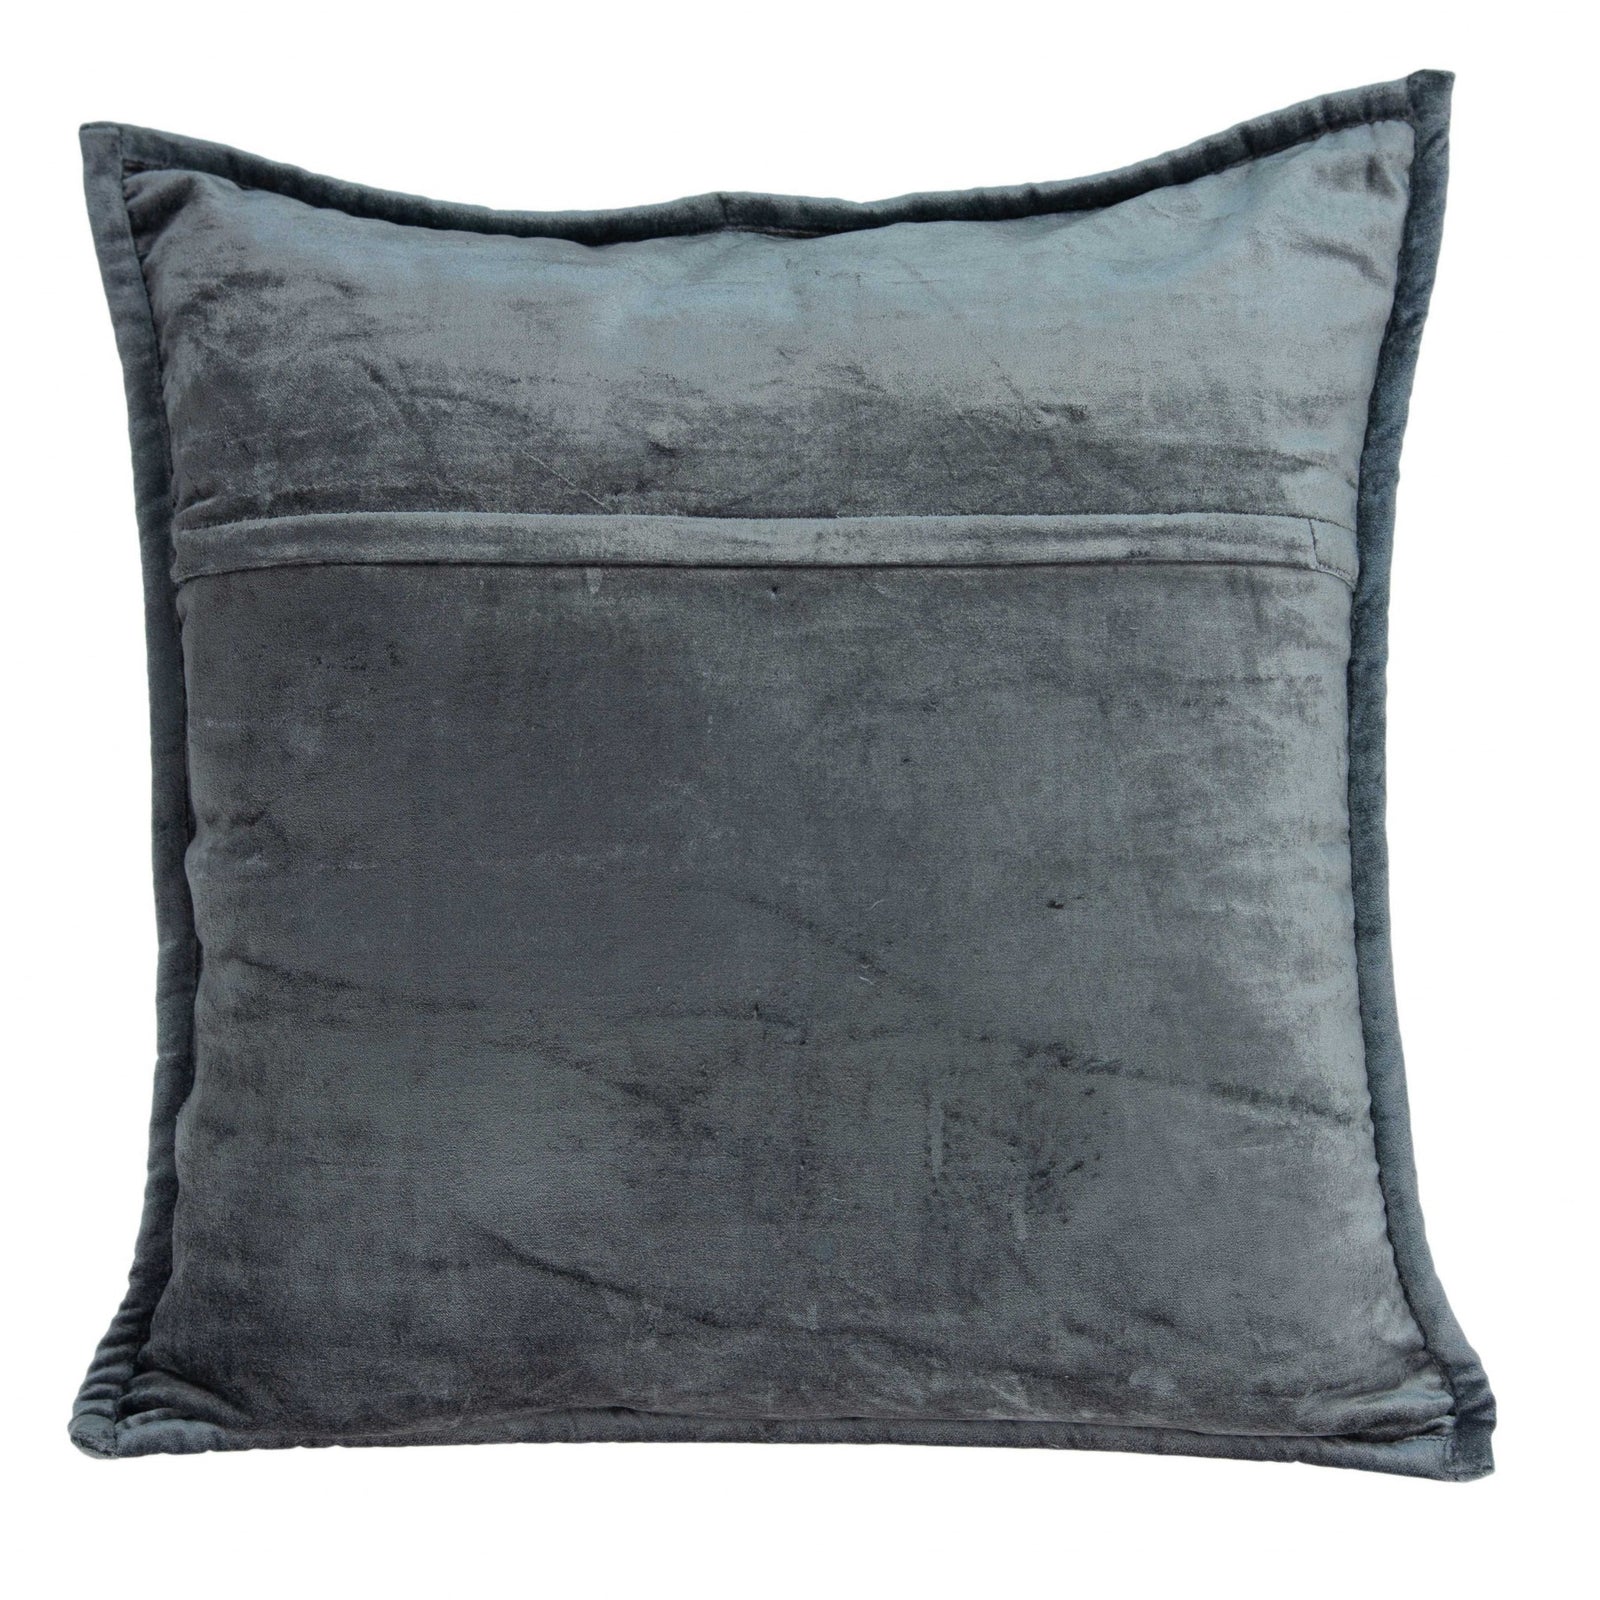 Super Soft Charcoal Solid Quilted Pillow Cover